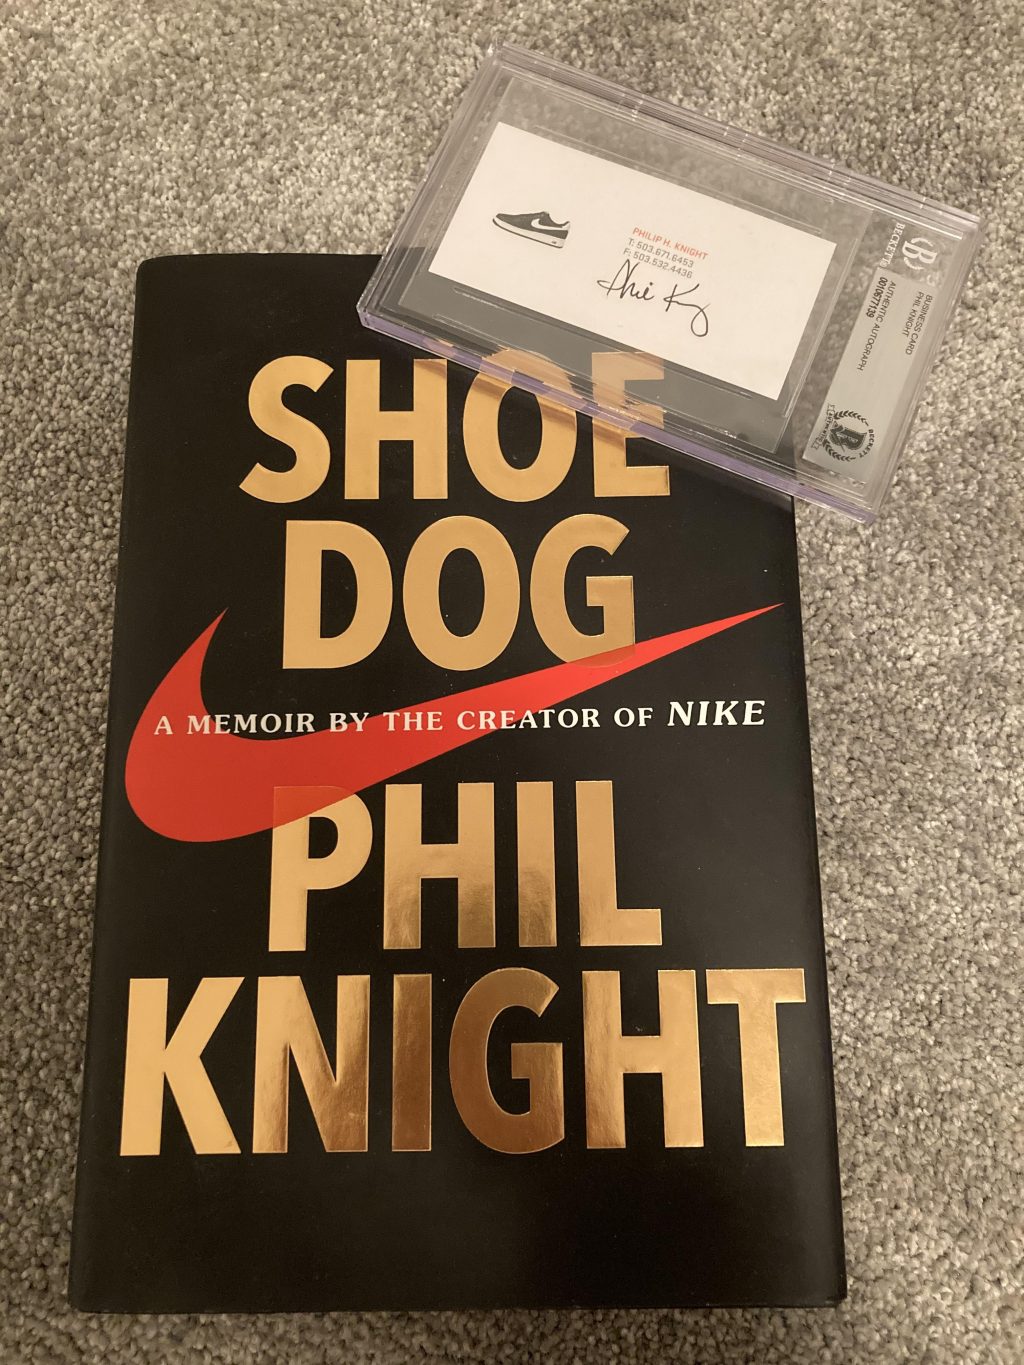 Crandall first read the book "Shoe Dog" by Nike founder Phil Knight when visiting Oregon during his first year of high school in 2016. Crandall said he bought a signed business card from Knight online as an inspirational piece that motivates him to work hard and think creatively.